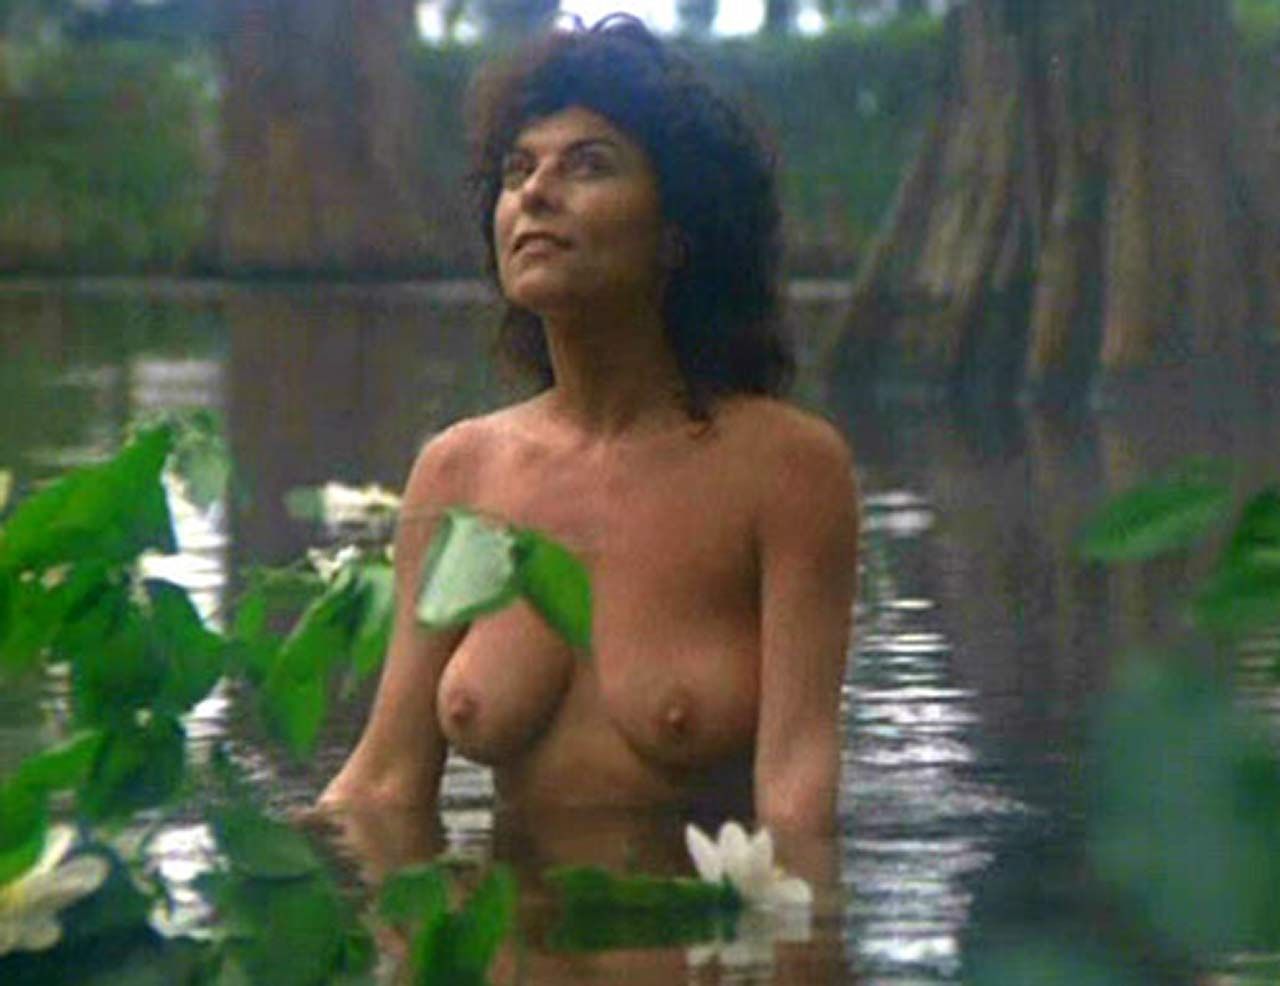 Adrienne Barbeau nude and sexy photos.